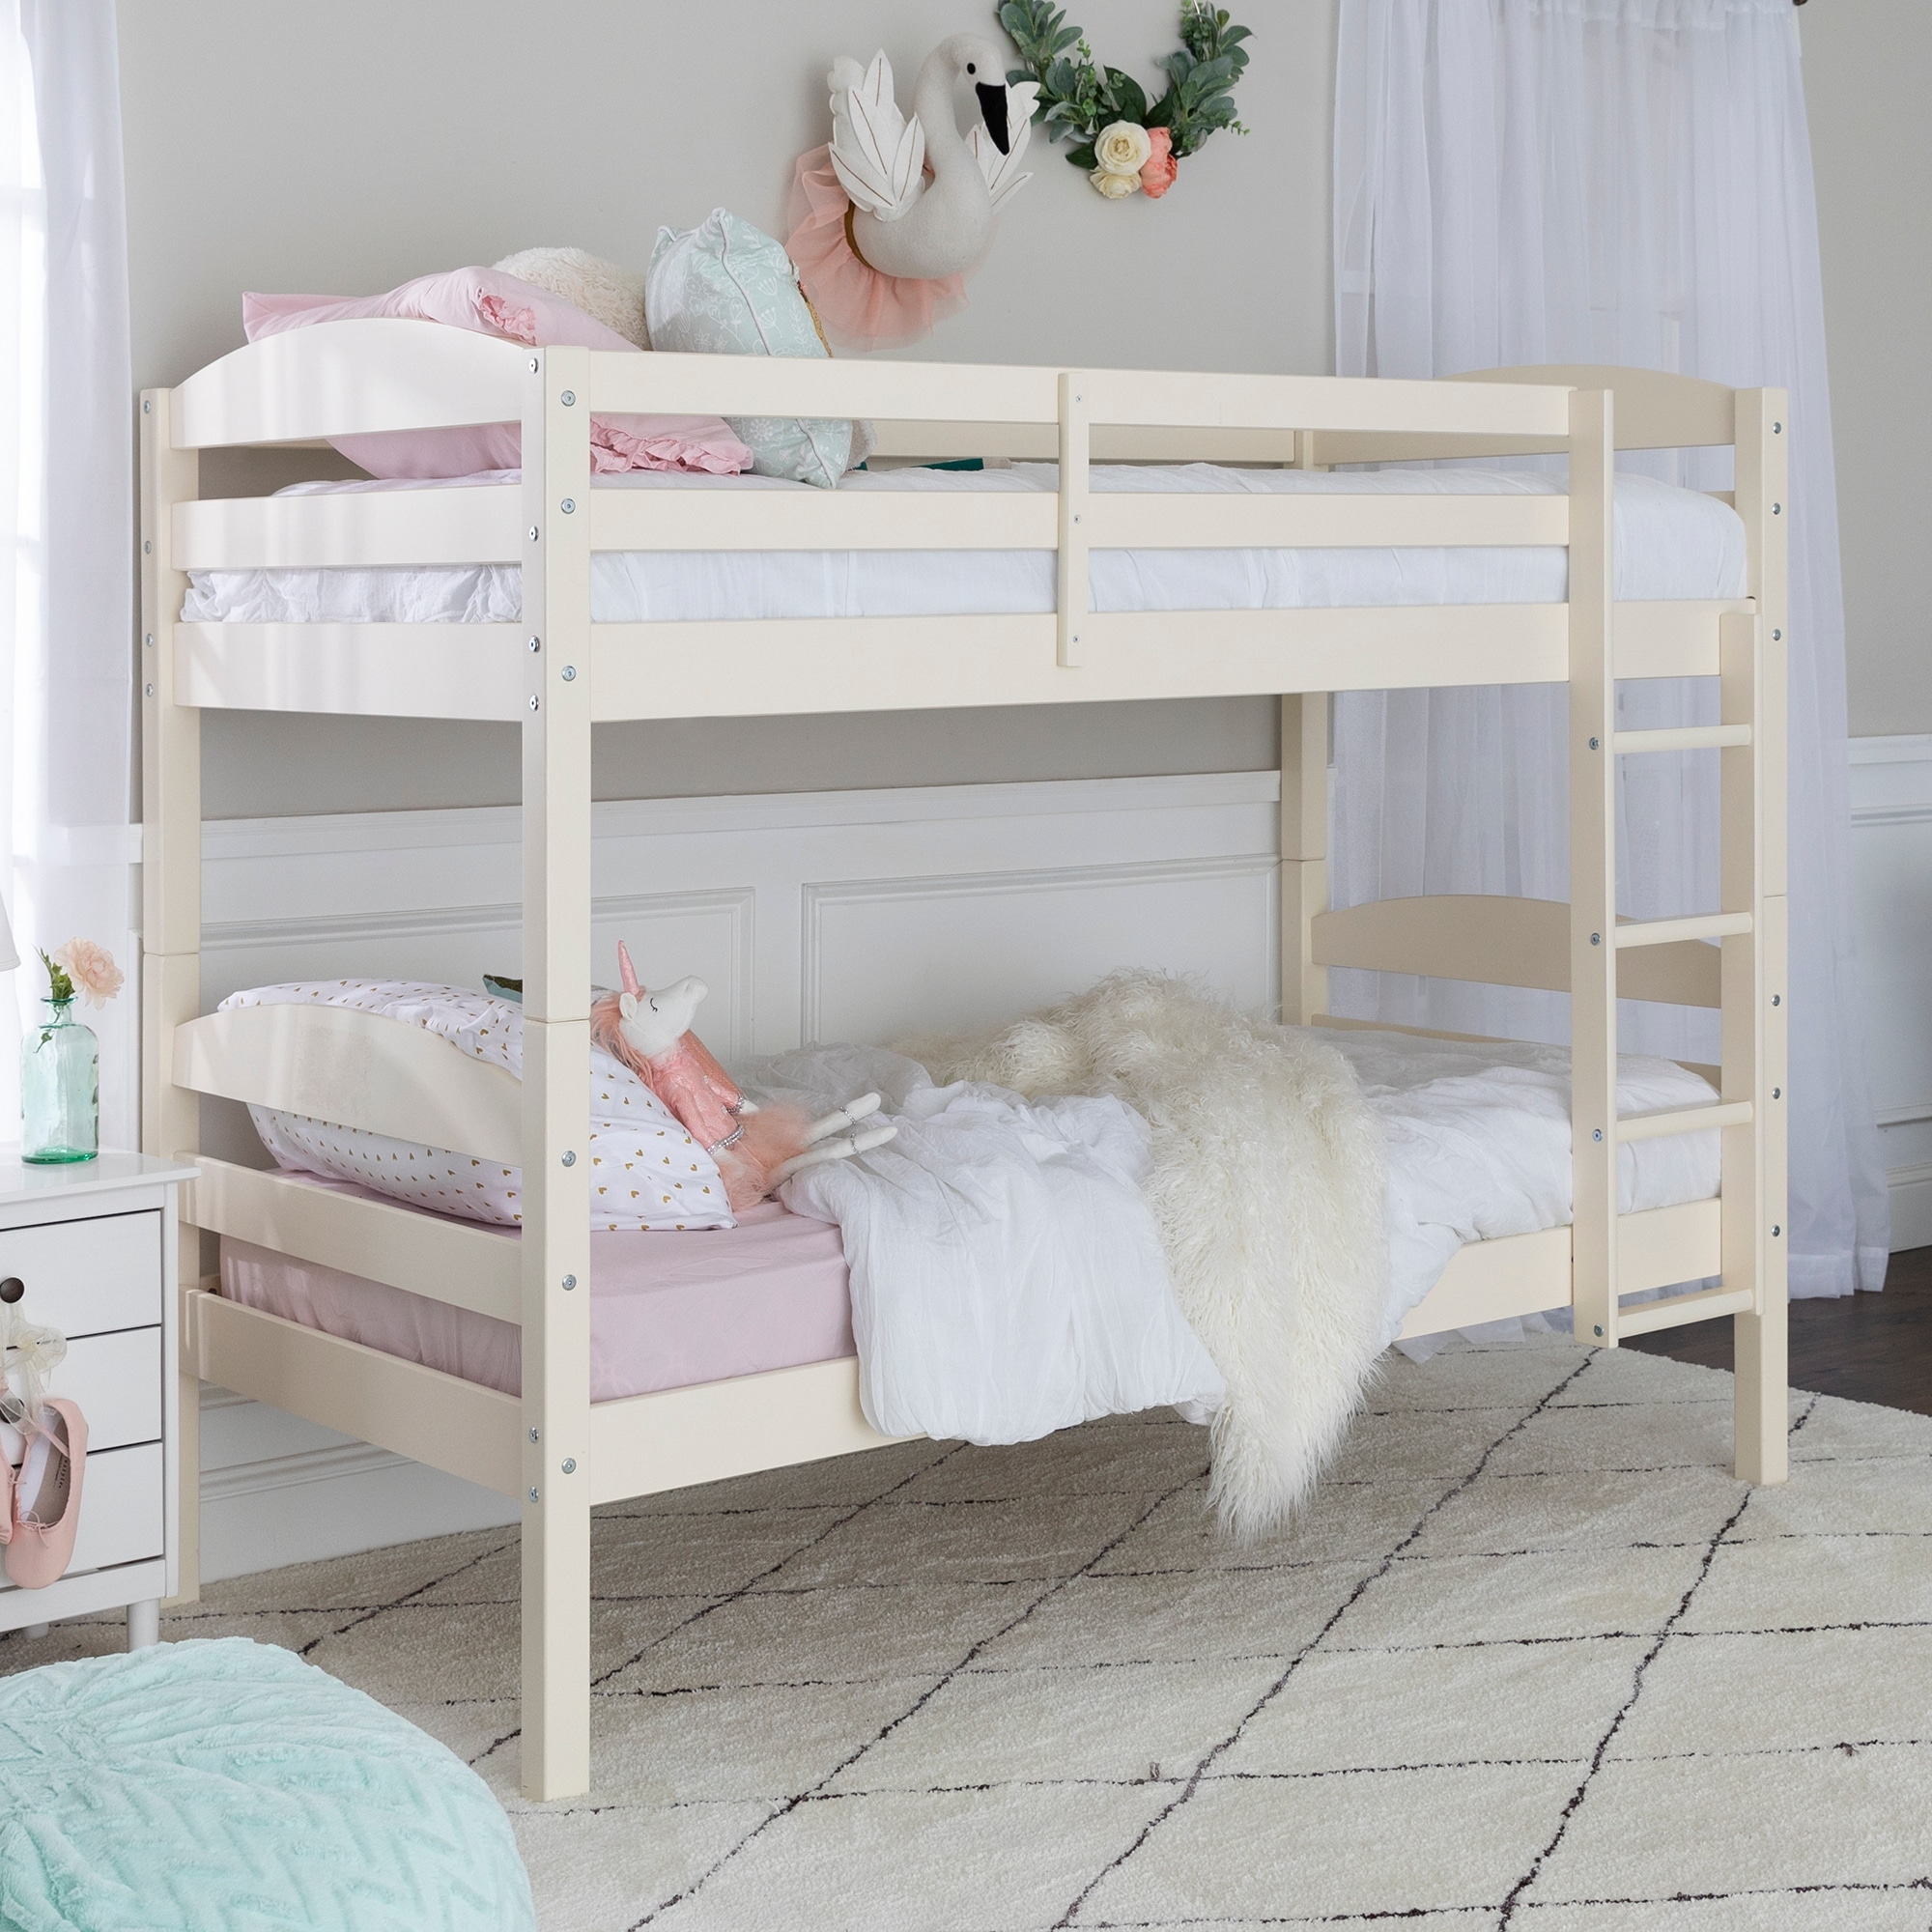 white bunk beds that separate